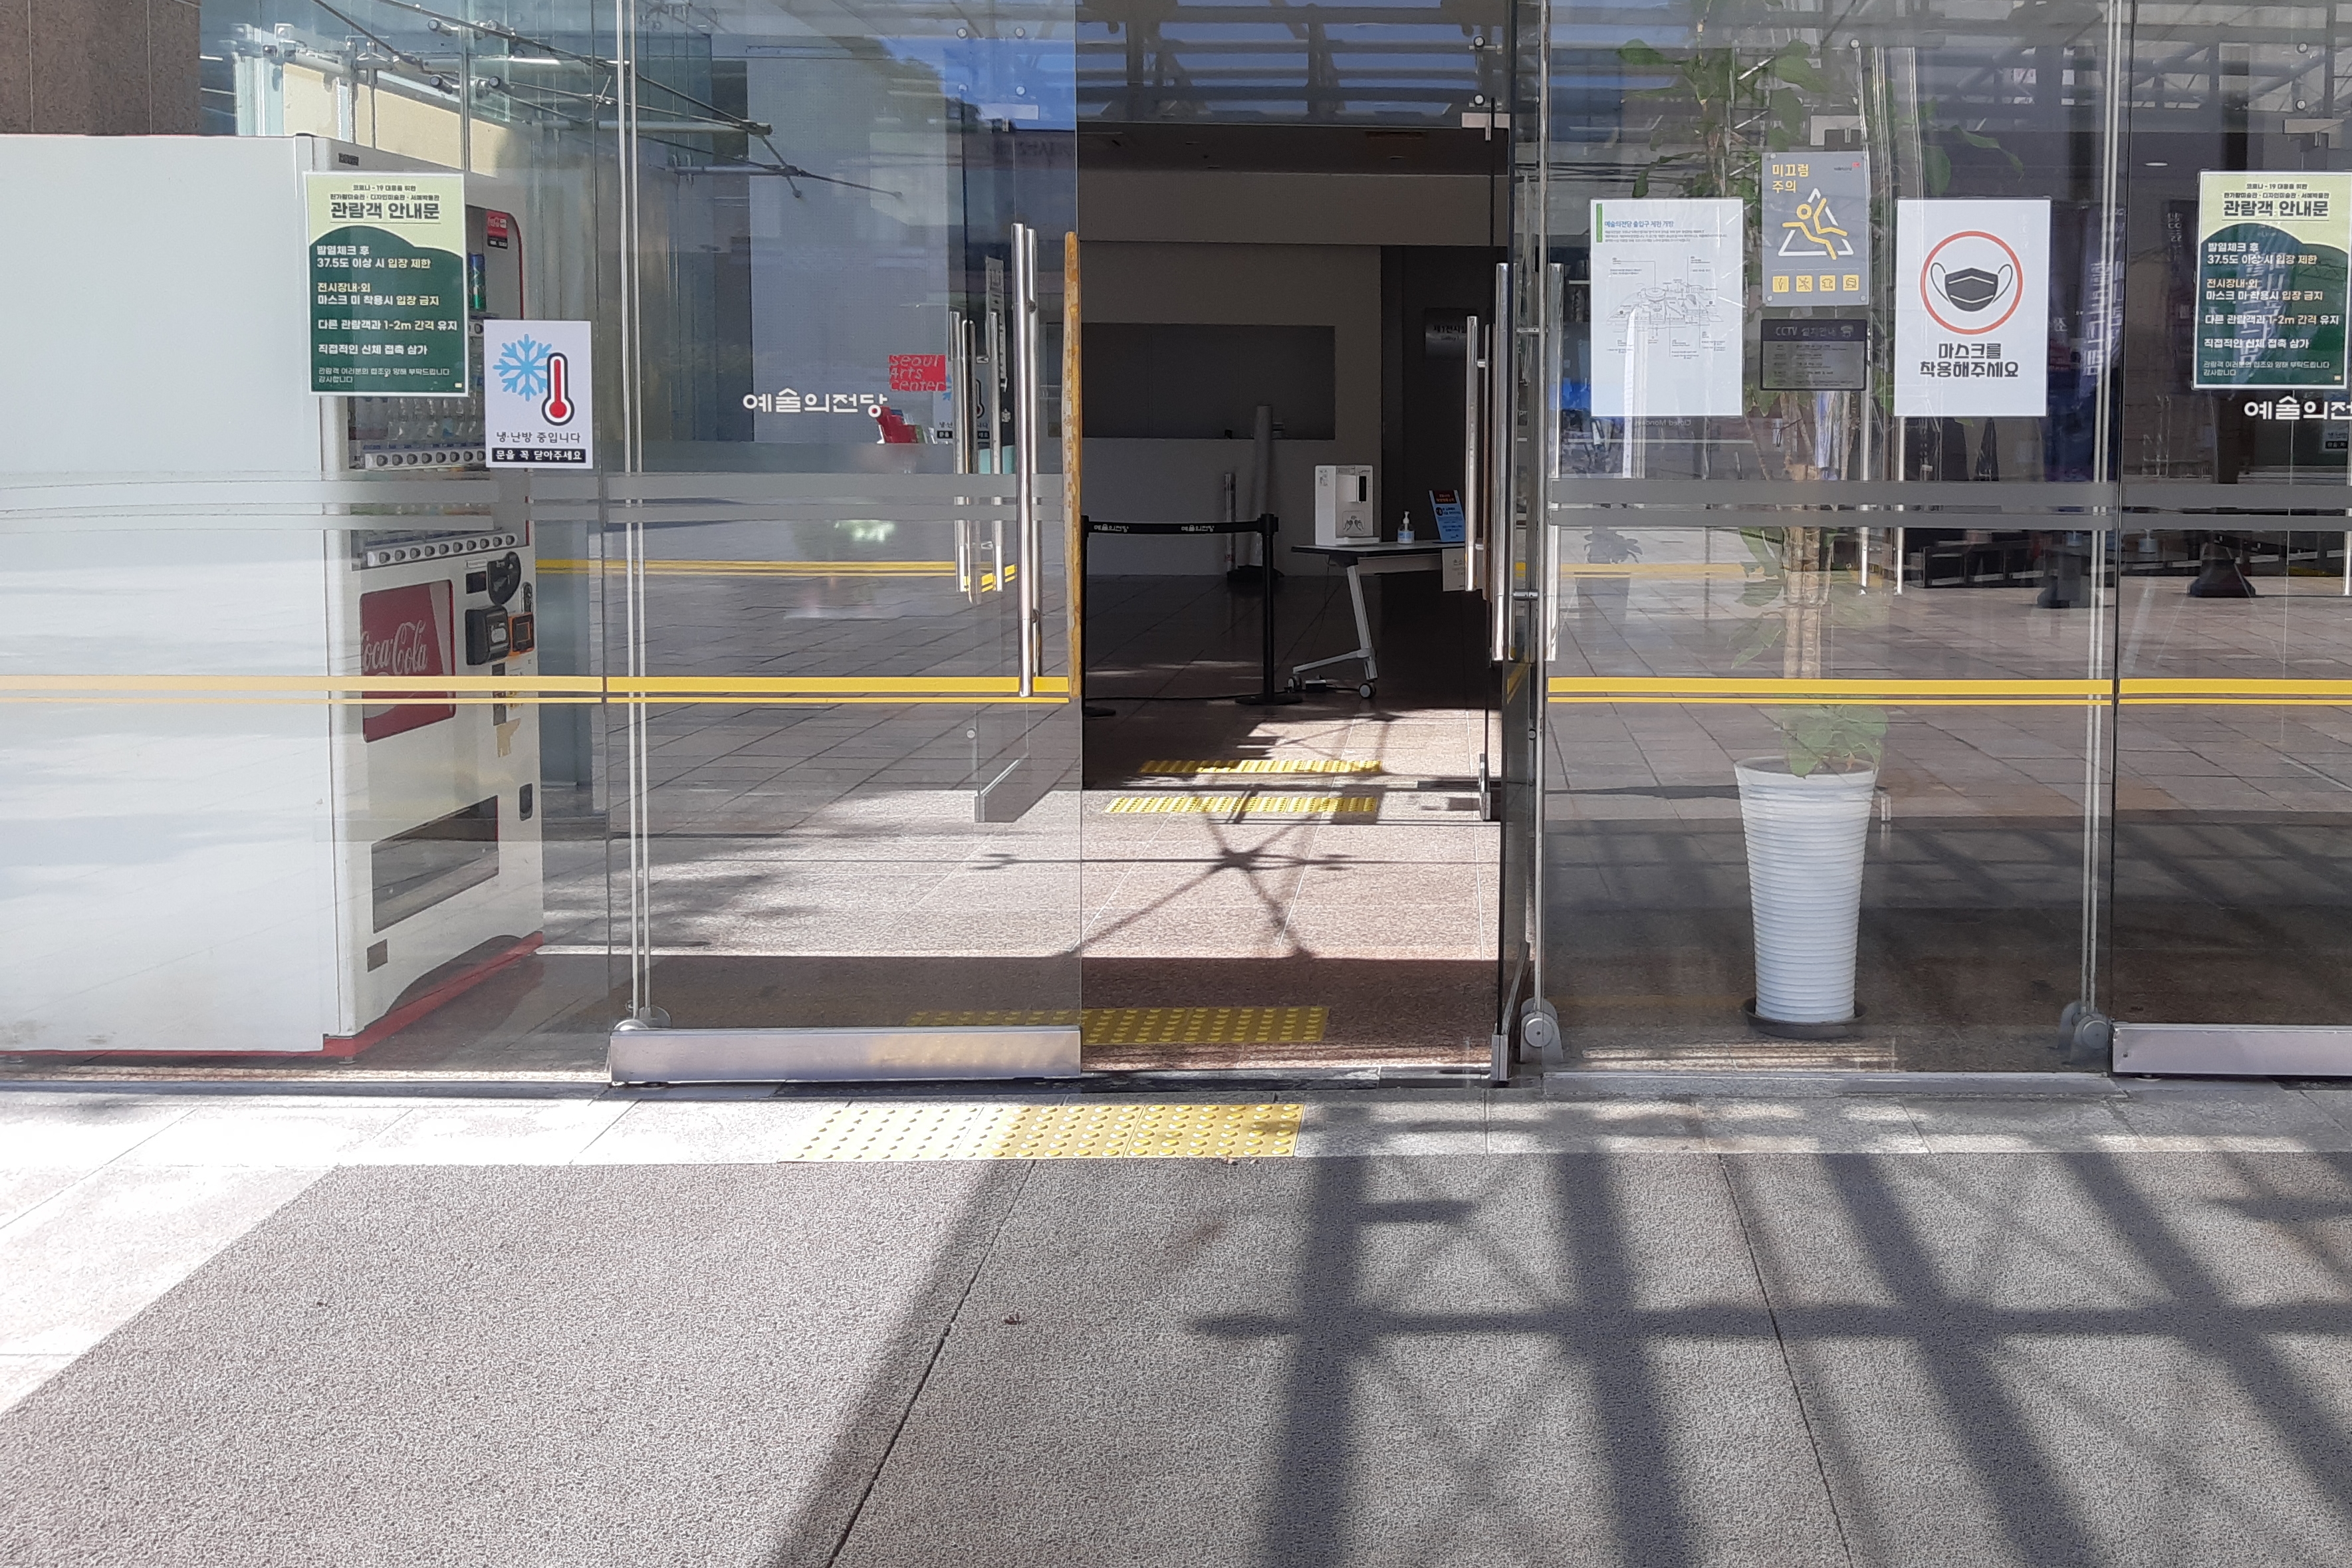 Entryway/ Main entrance0 : Main entrance with wide width with tactile paving for persons with visual impairment